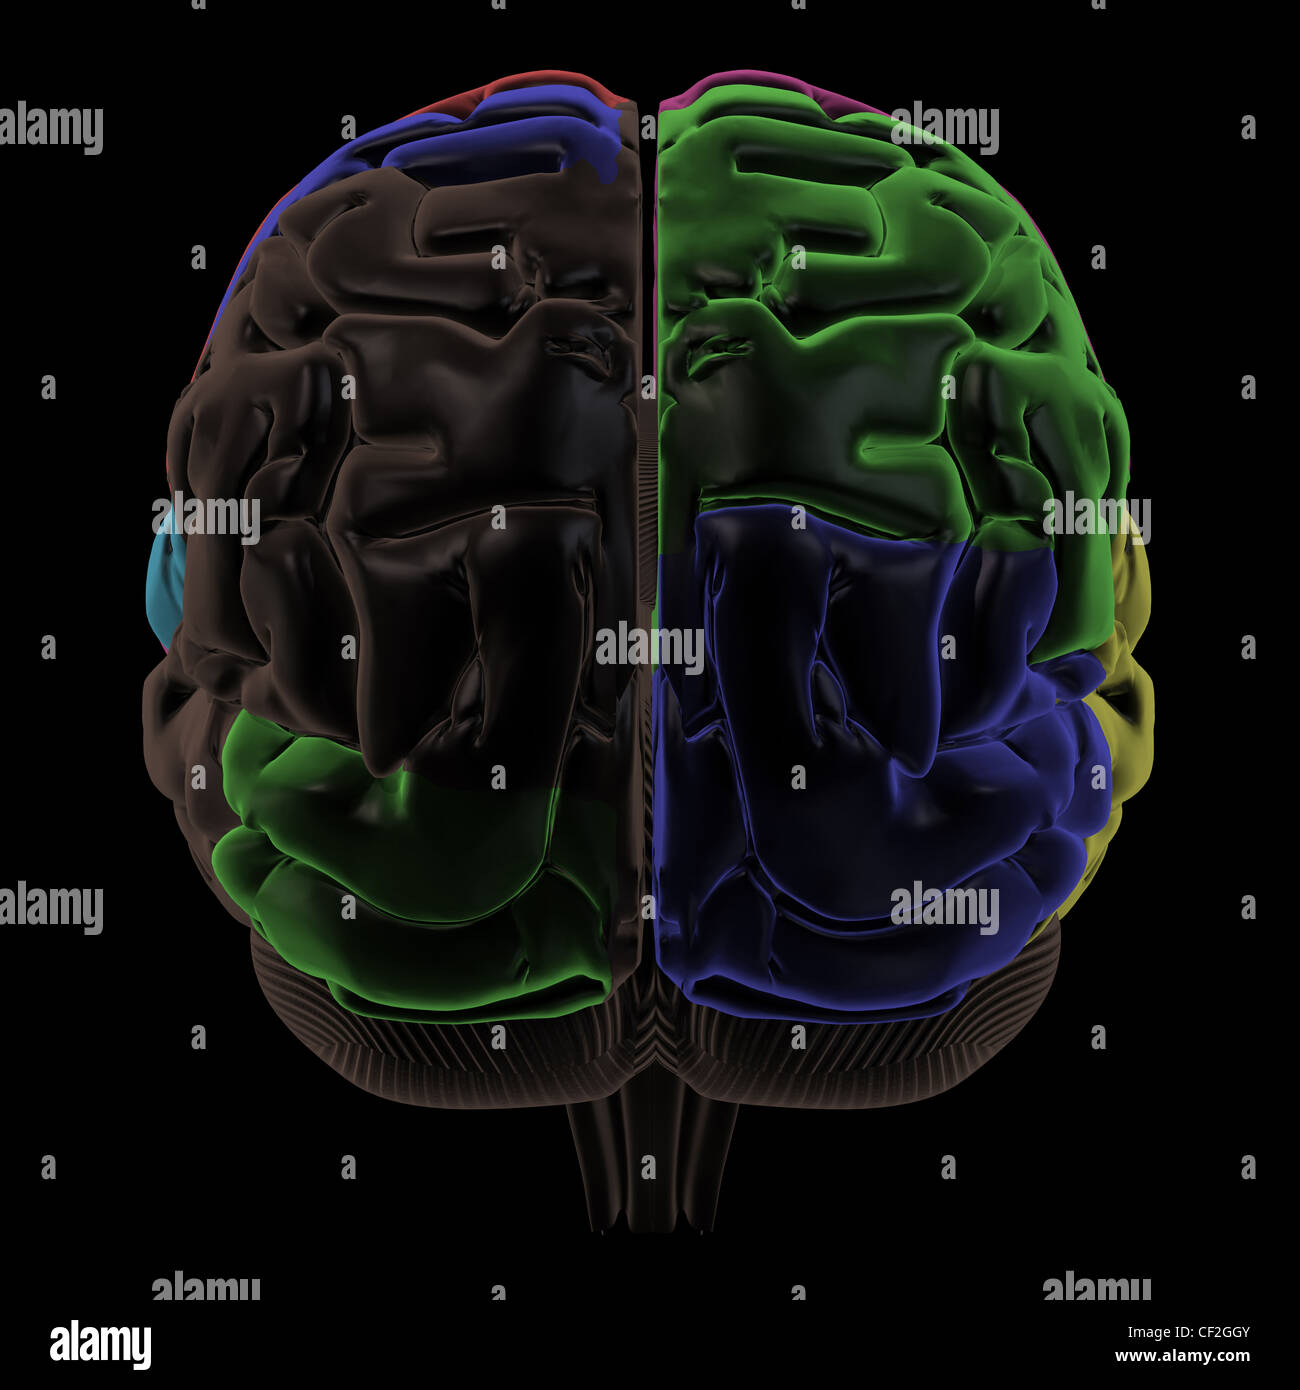 Colored areas of the Brain, back view Stock Photo